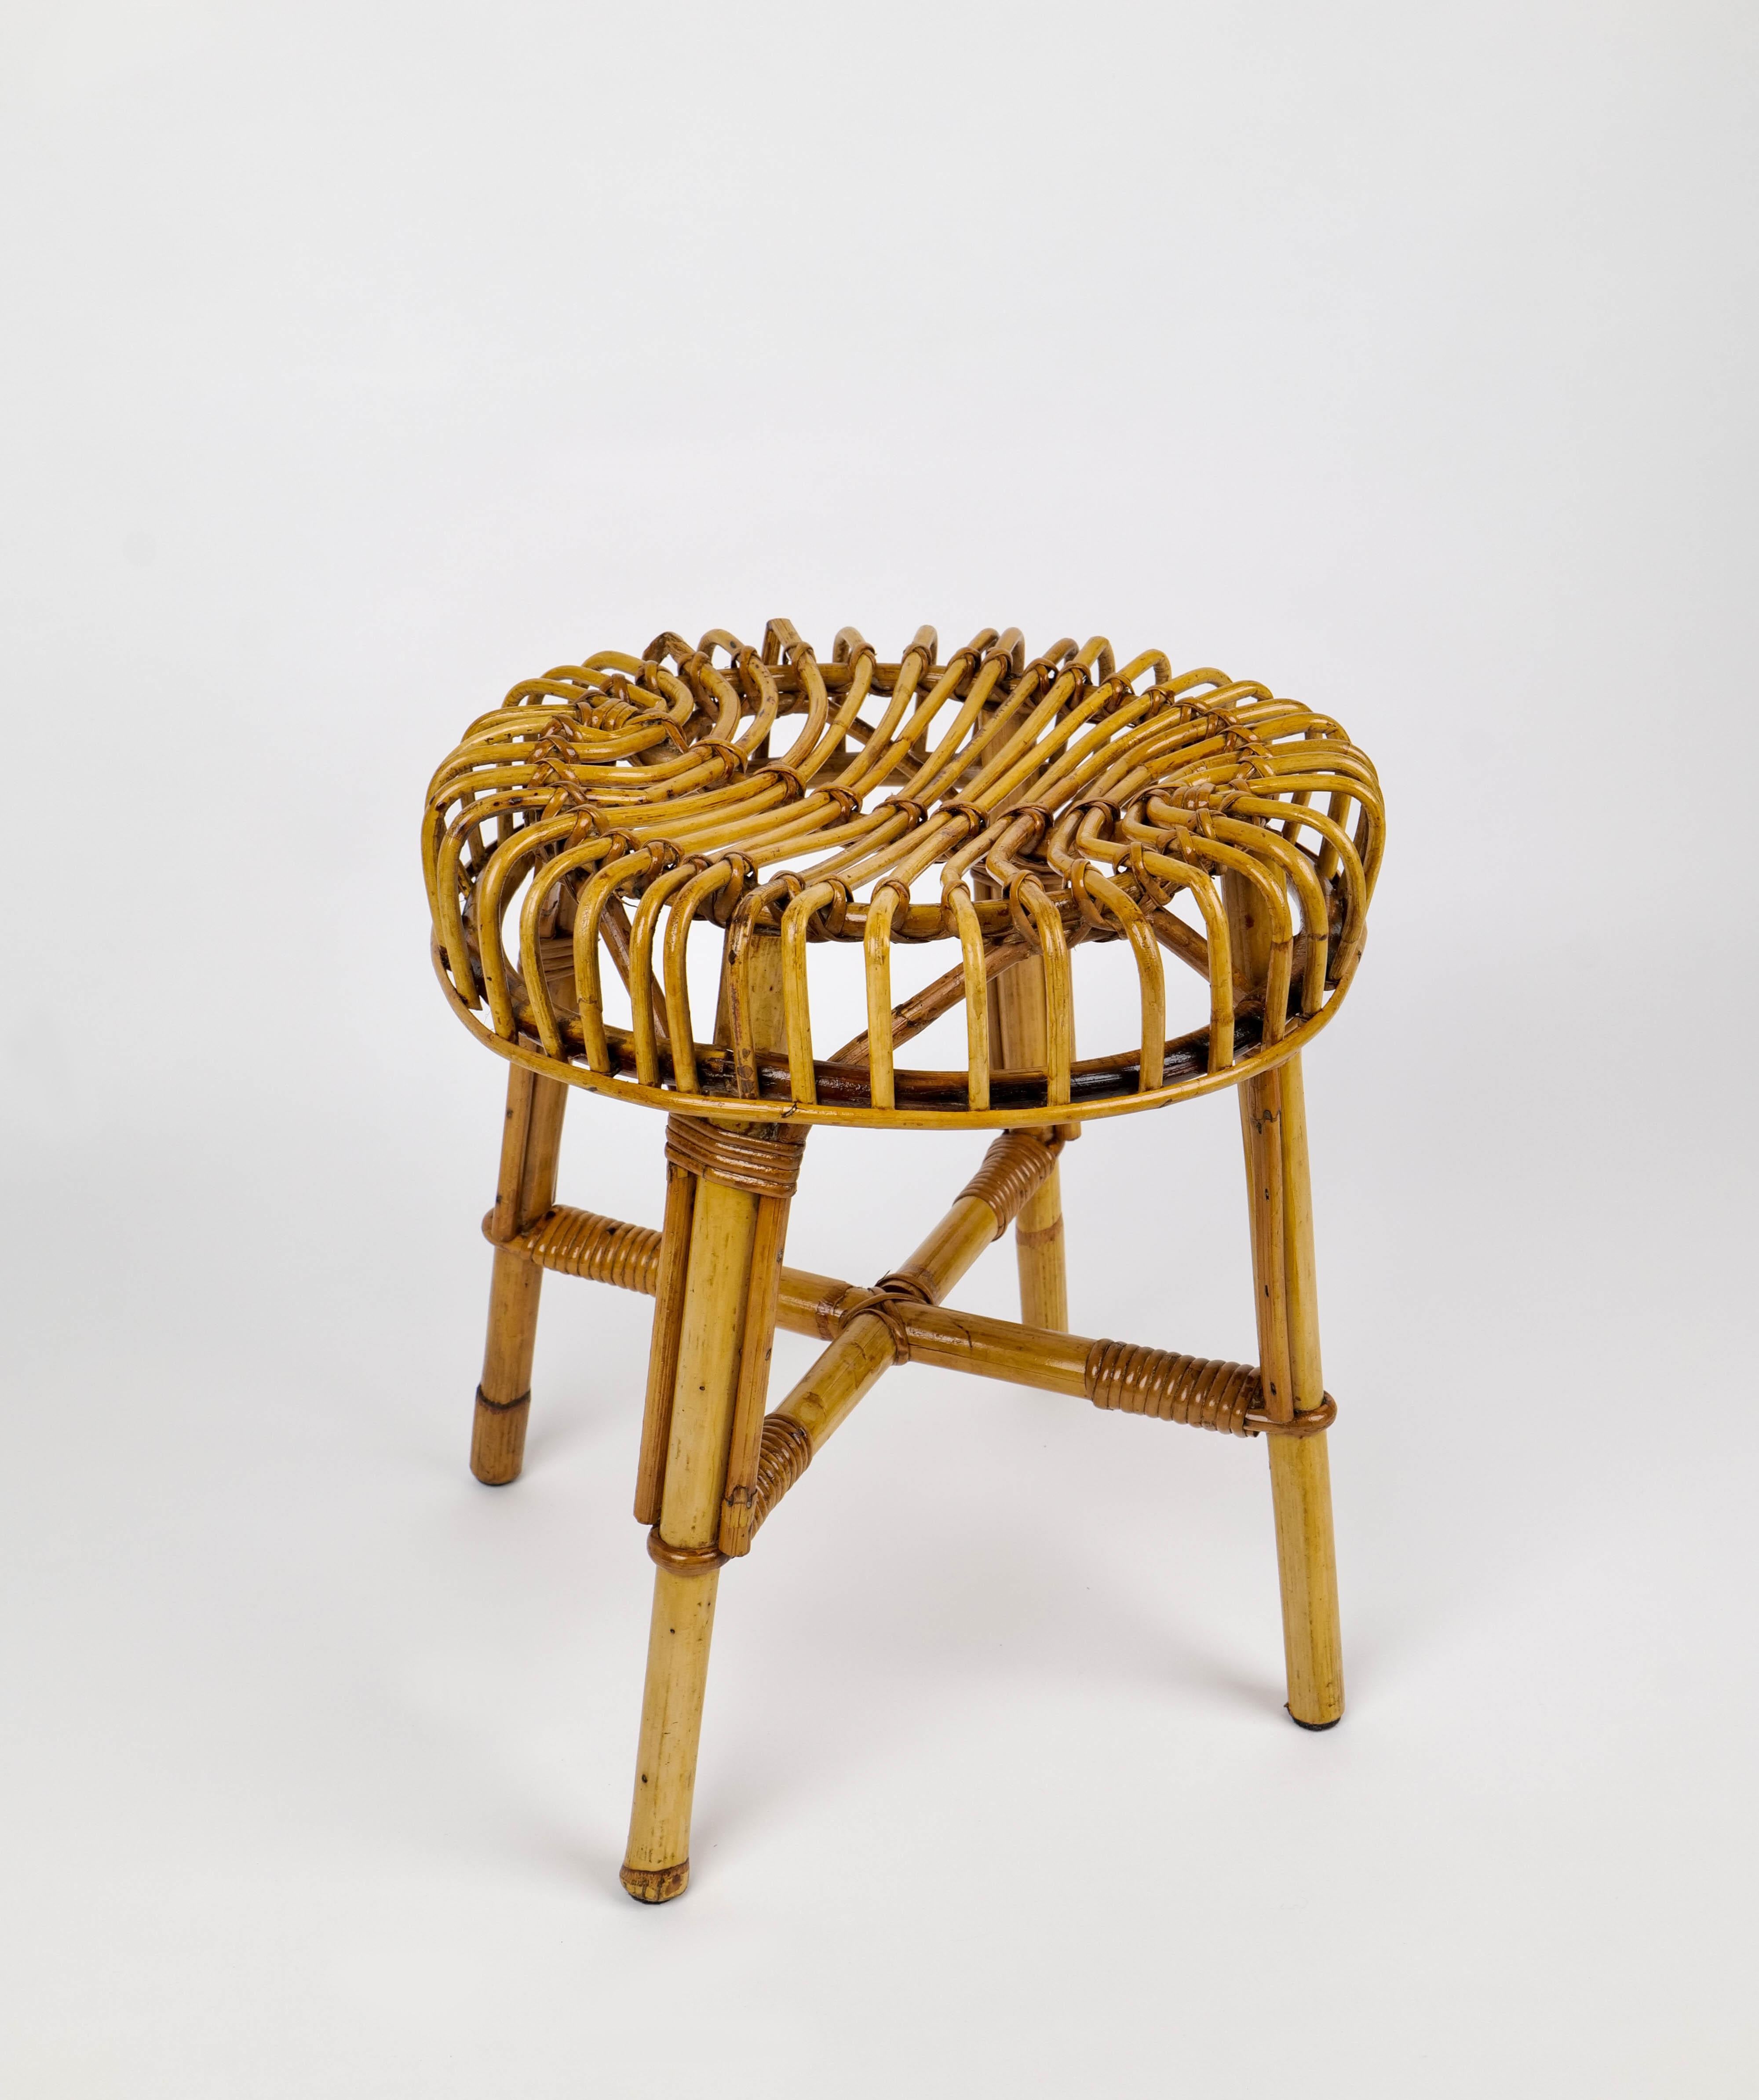 Italian Mid-Century Modern Bamboo Rattan Stool Attributed to Franco Albini, Italy, 1960s For Sale